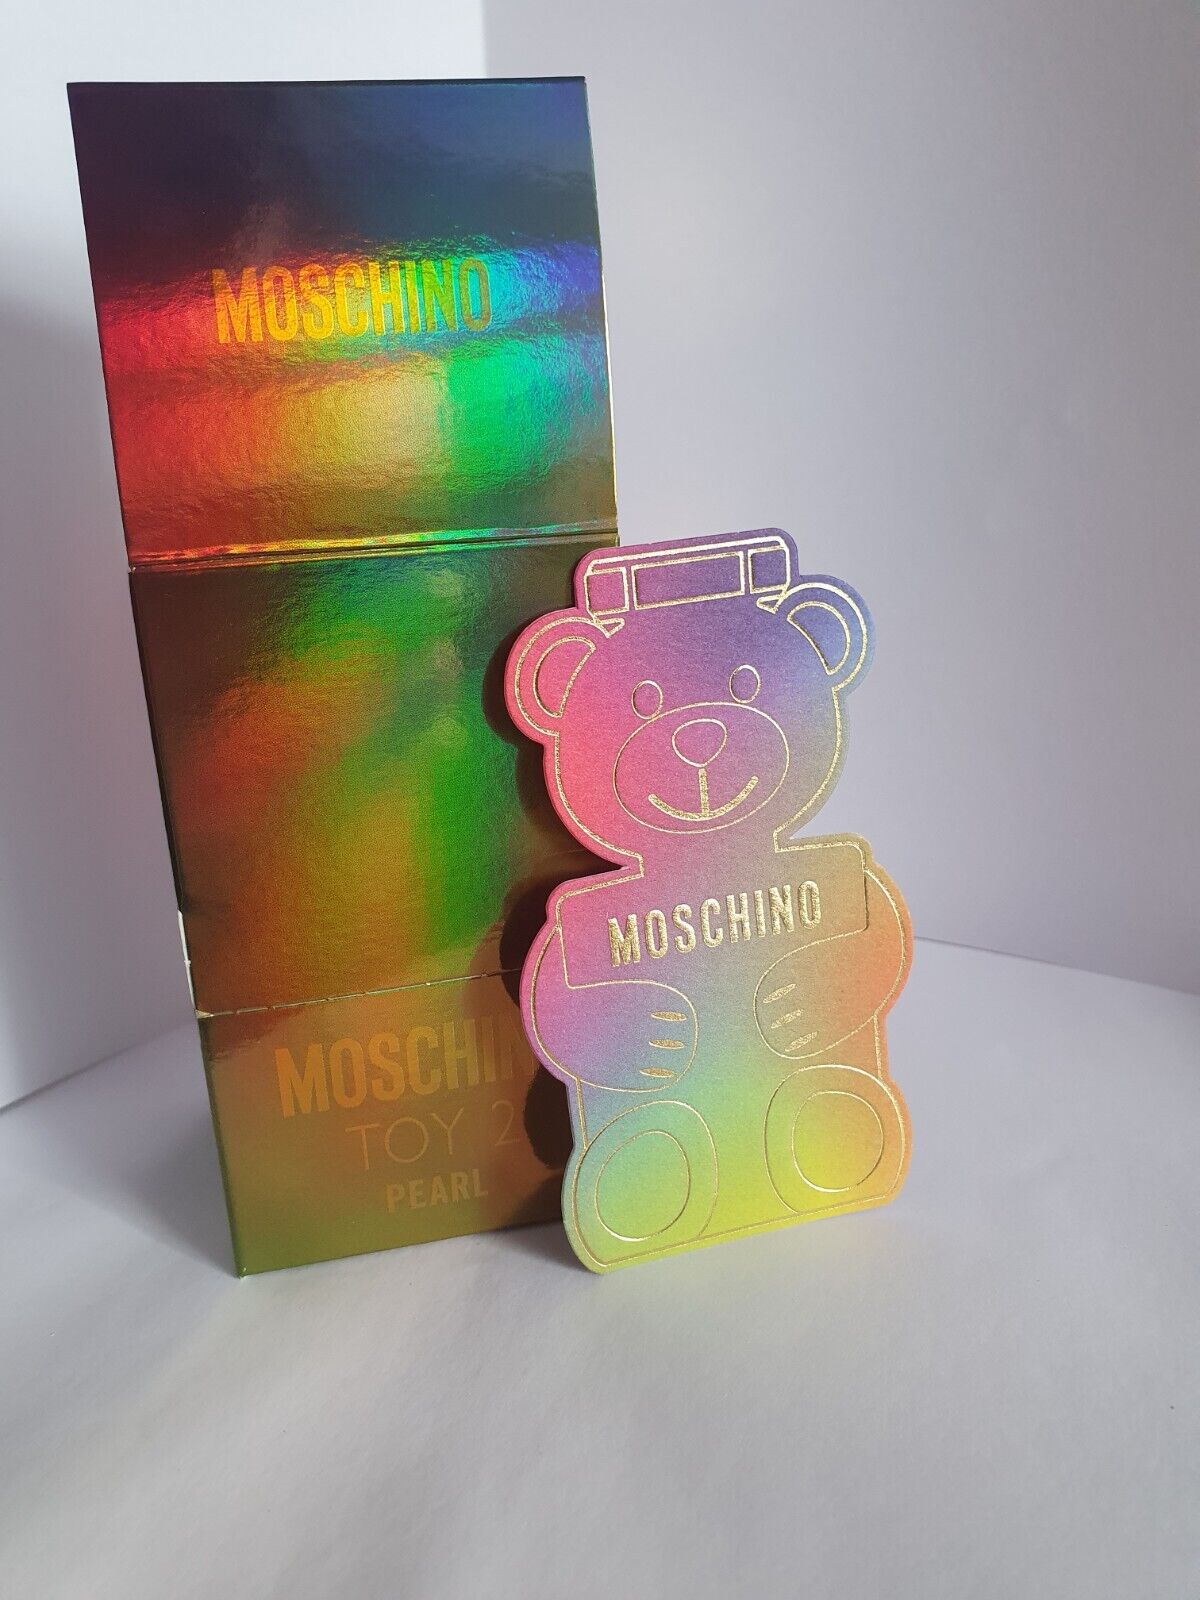 Moschino  Toy 2 Pearl Advertising Blotter Card New Release